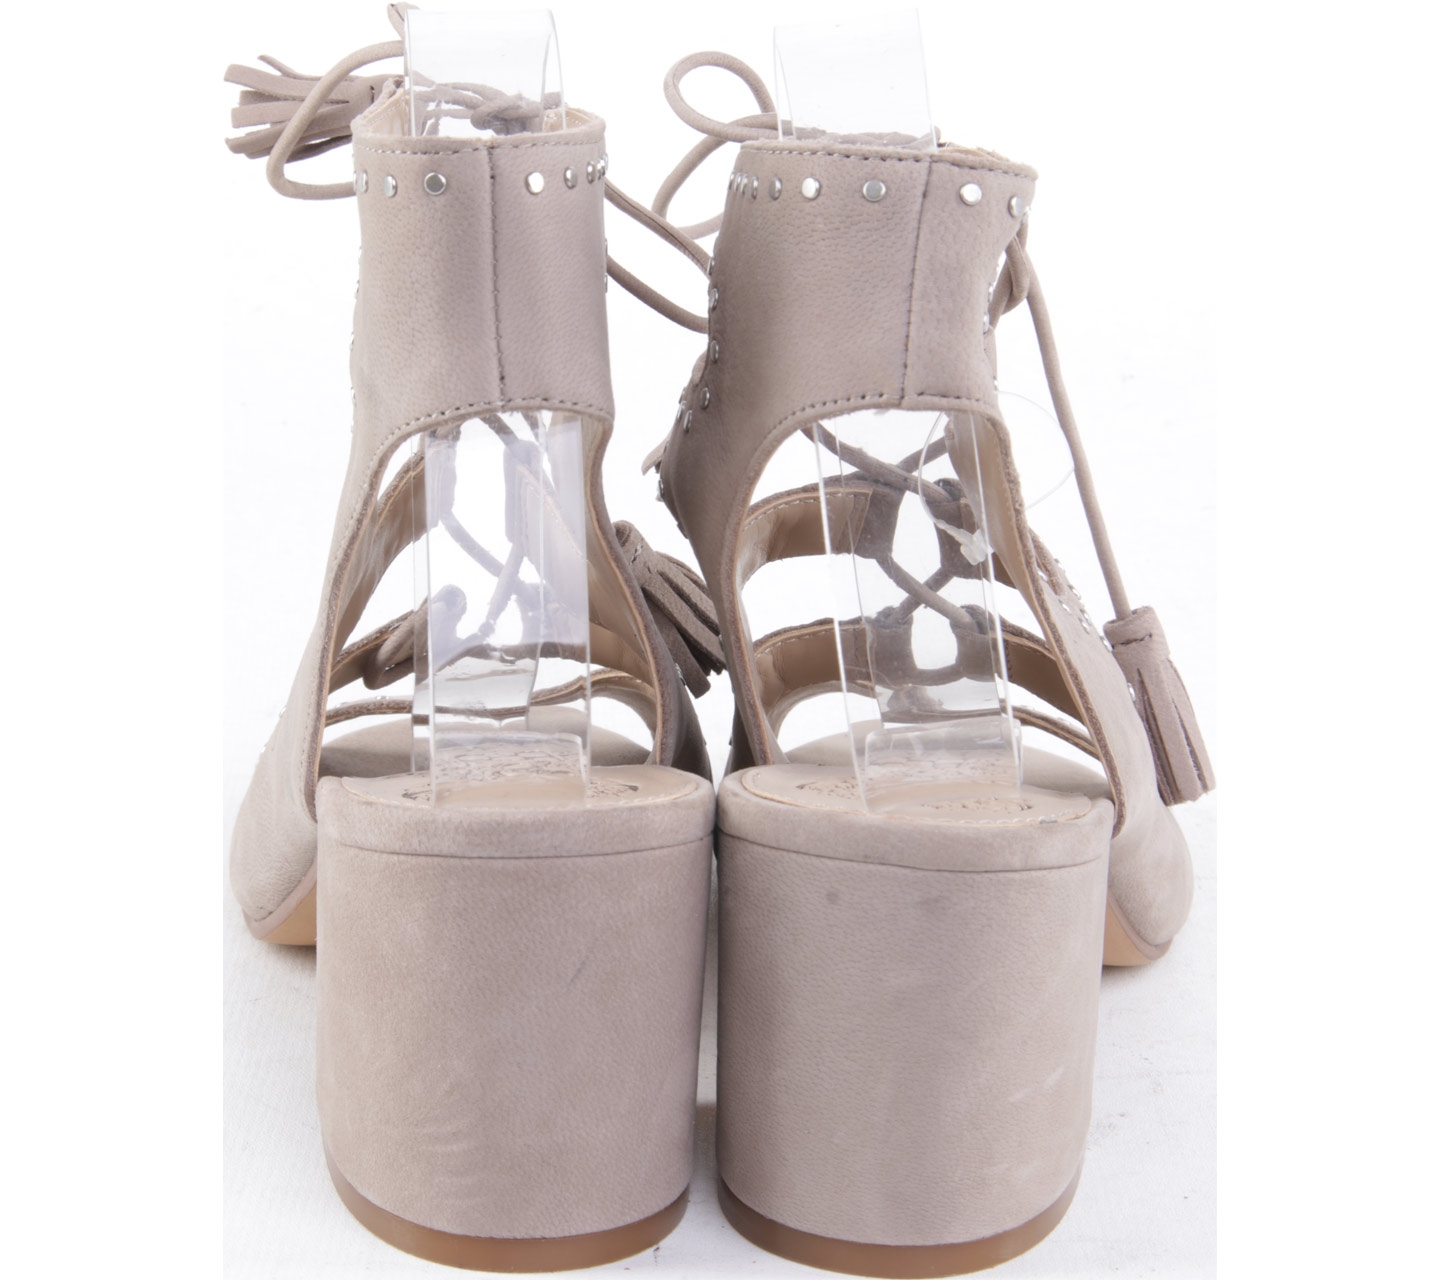 Vince Camuto Taupe Heels